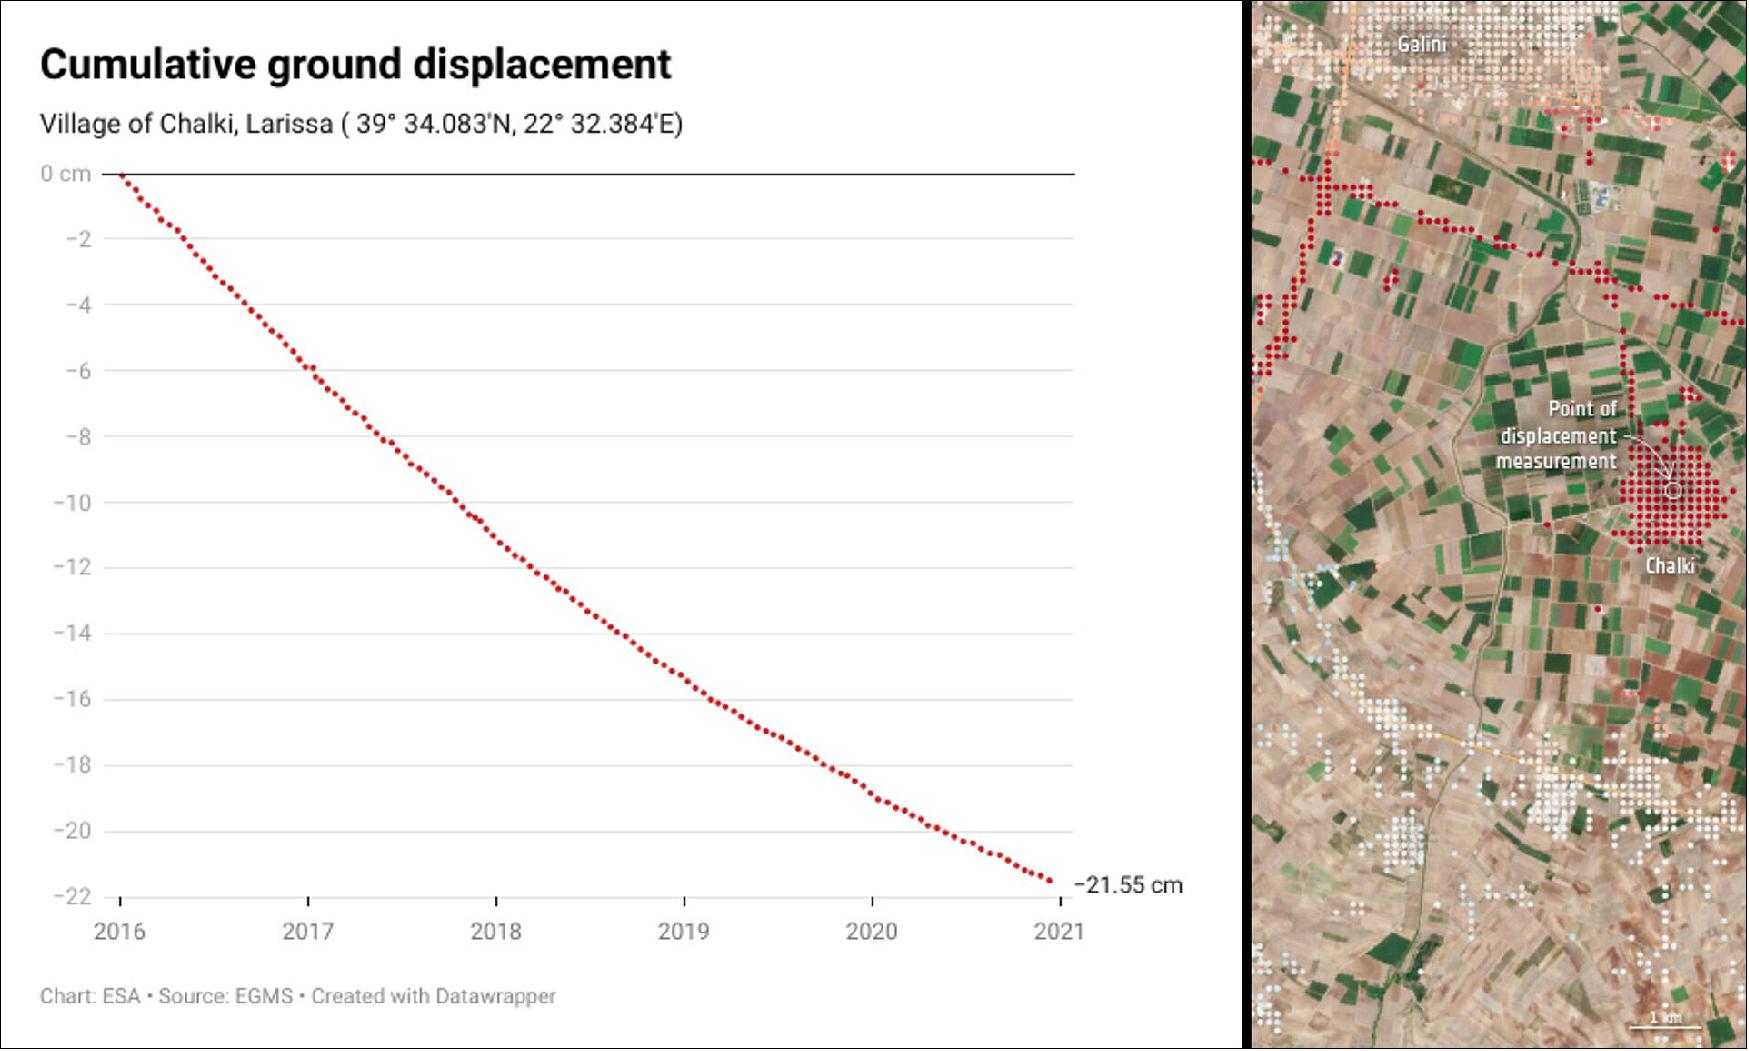 graph shows the rate of ground displacement around the village of Chalki, near Larissa in Greece